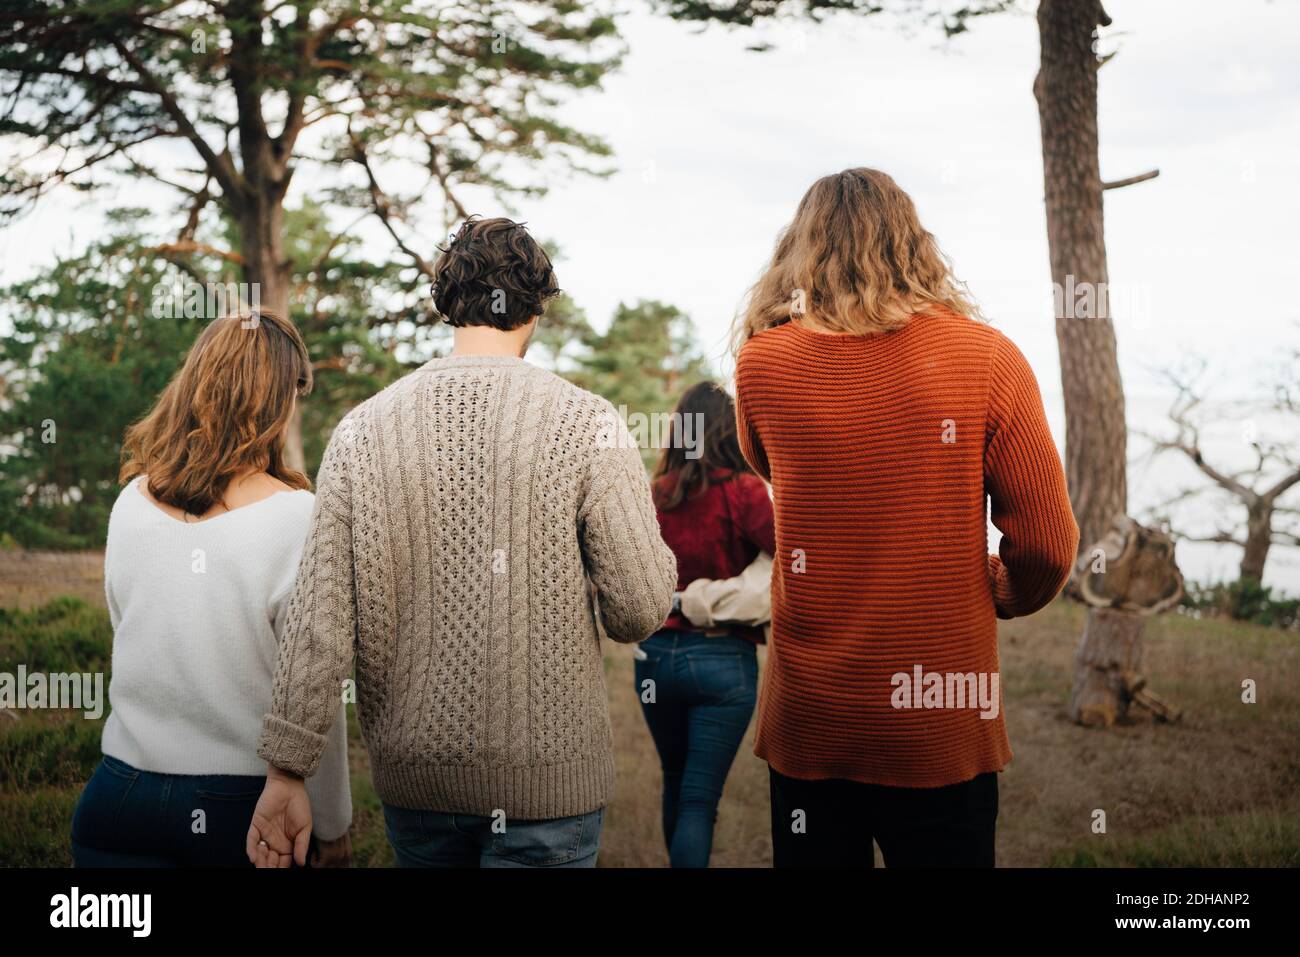 Rear view of friends walking in forest Stock Photo